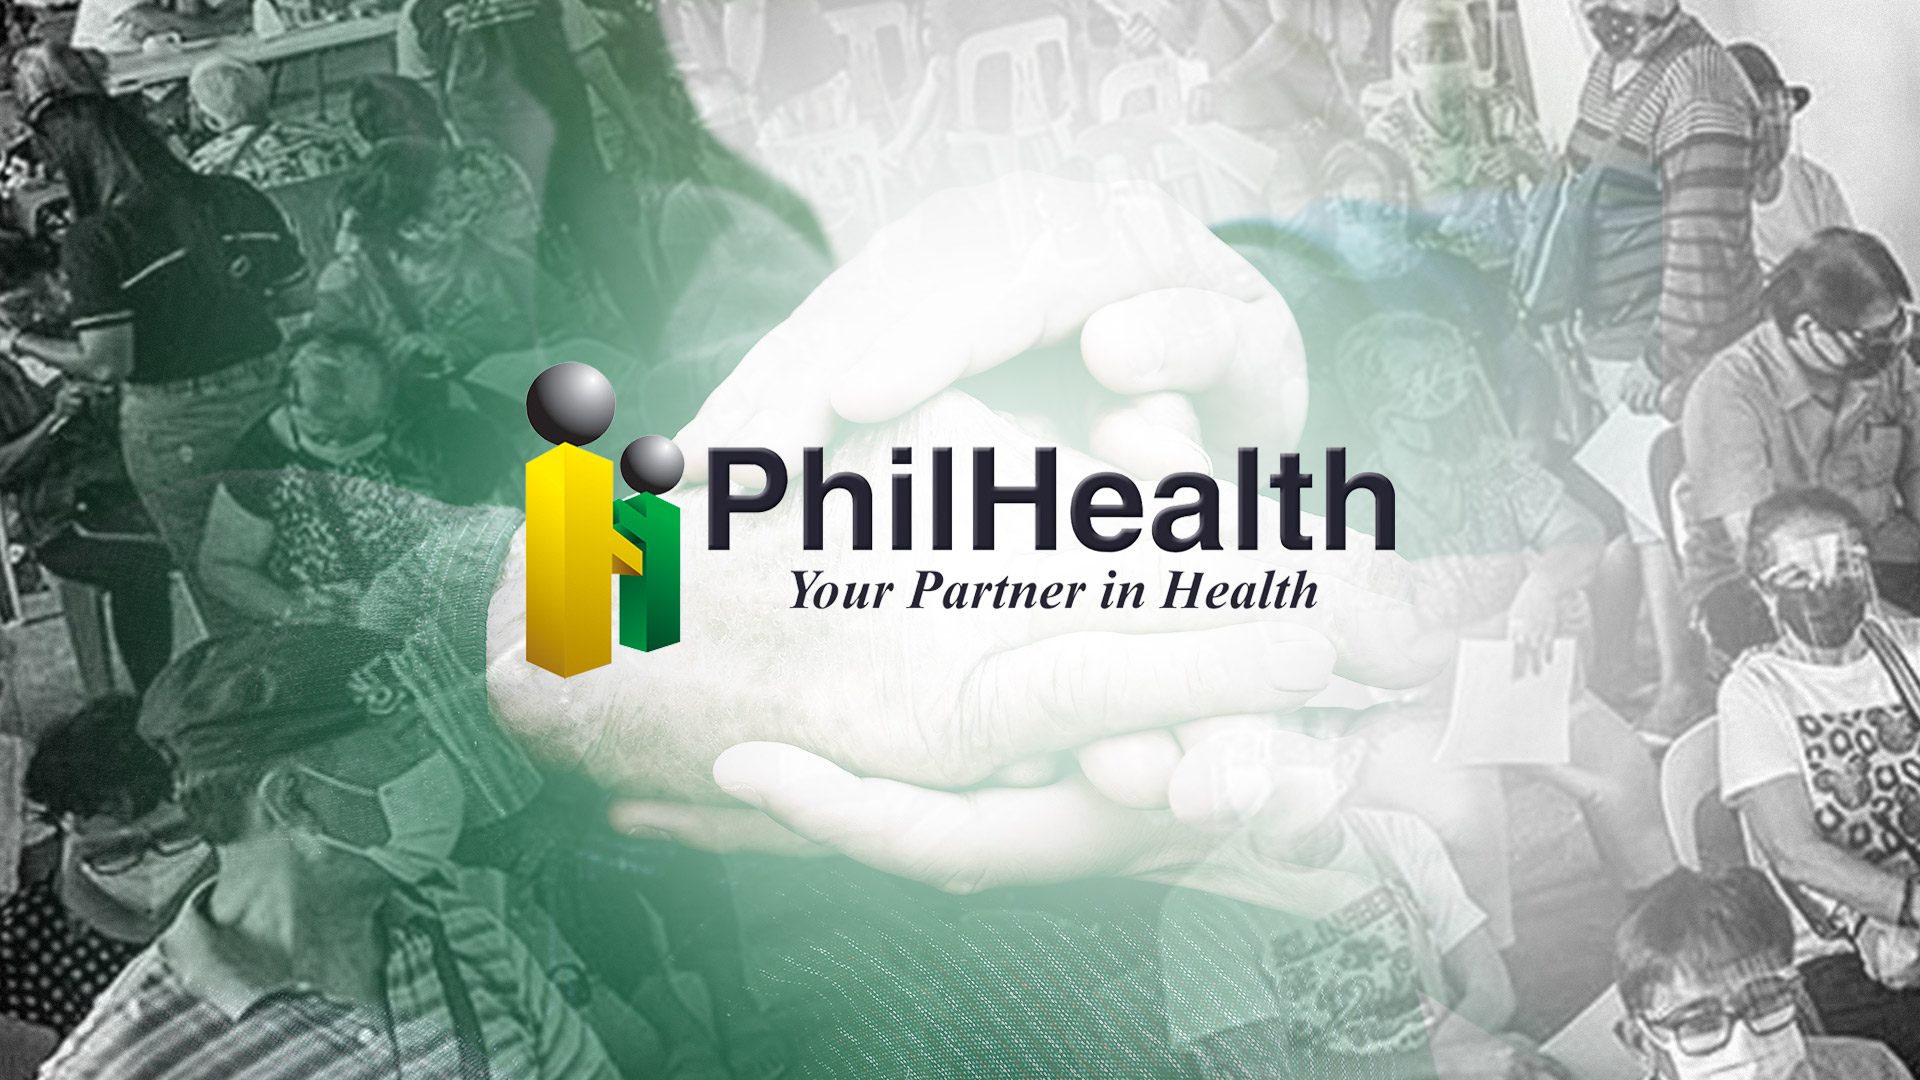 FAST FACTS: Avail yourself of PhilHealth services without having to pay premiums